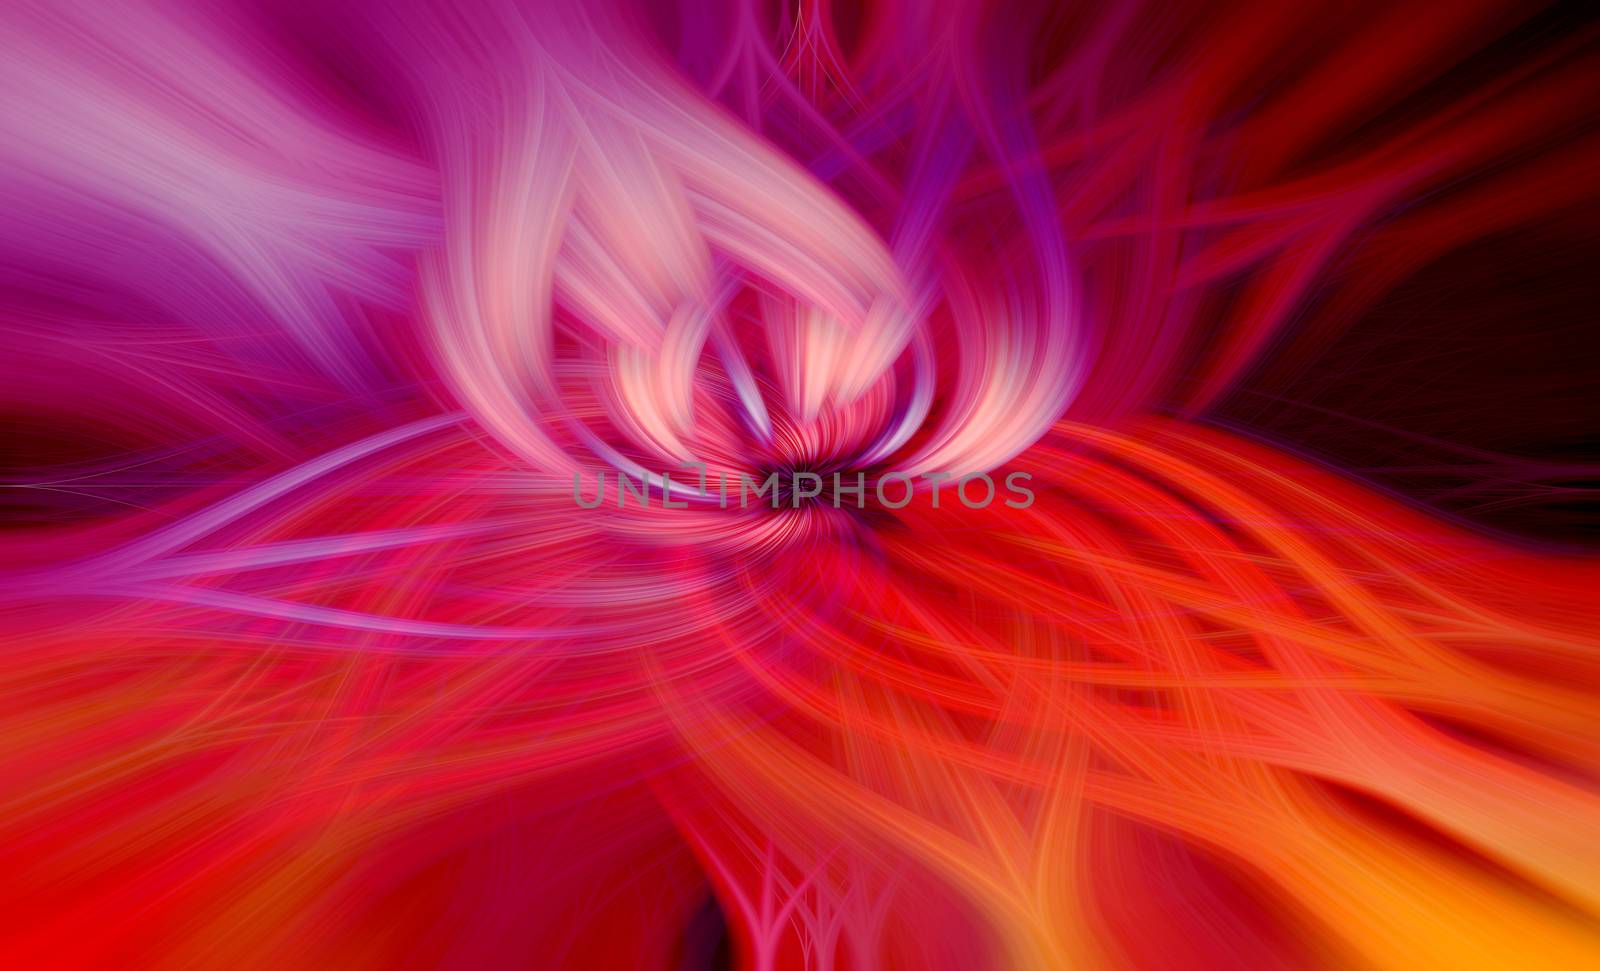 Beautiful abstract intertwined 3d fibers forming a shape of sparkle, flame, flower, interlinked hearts. Pink, blue, maroon, orange, and purple colors. Illustration.